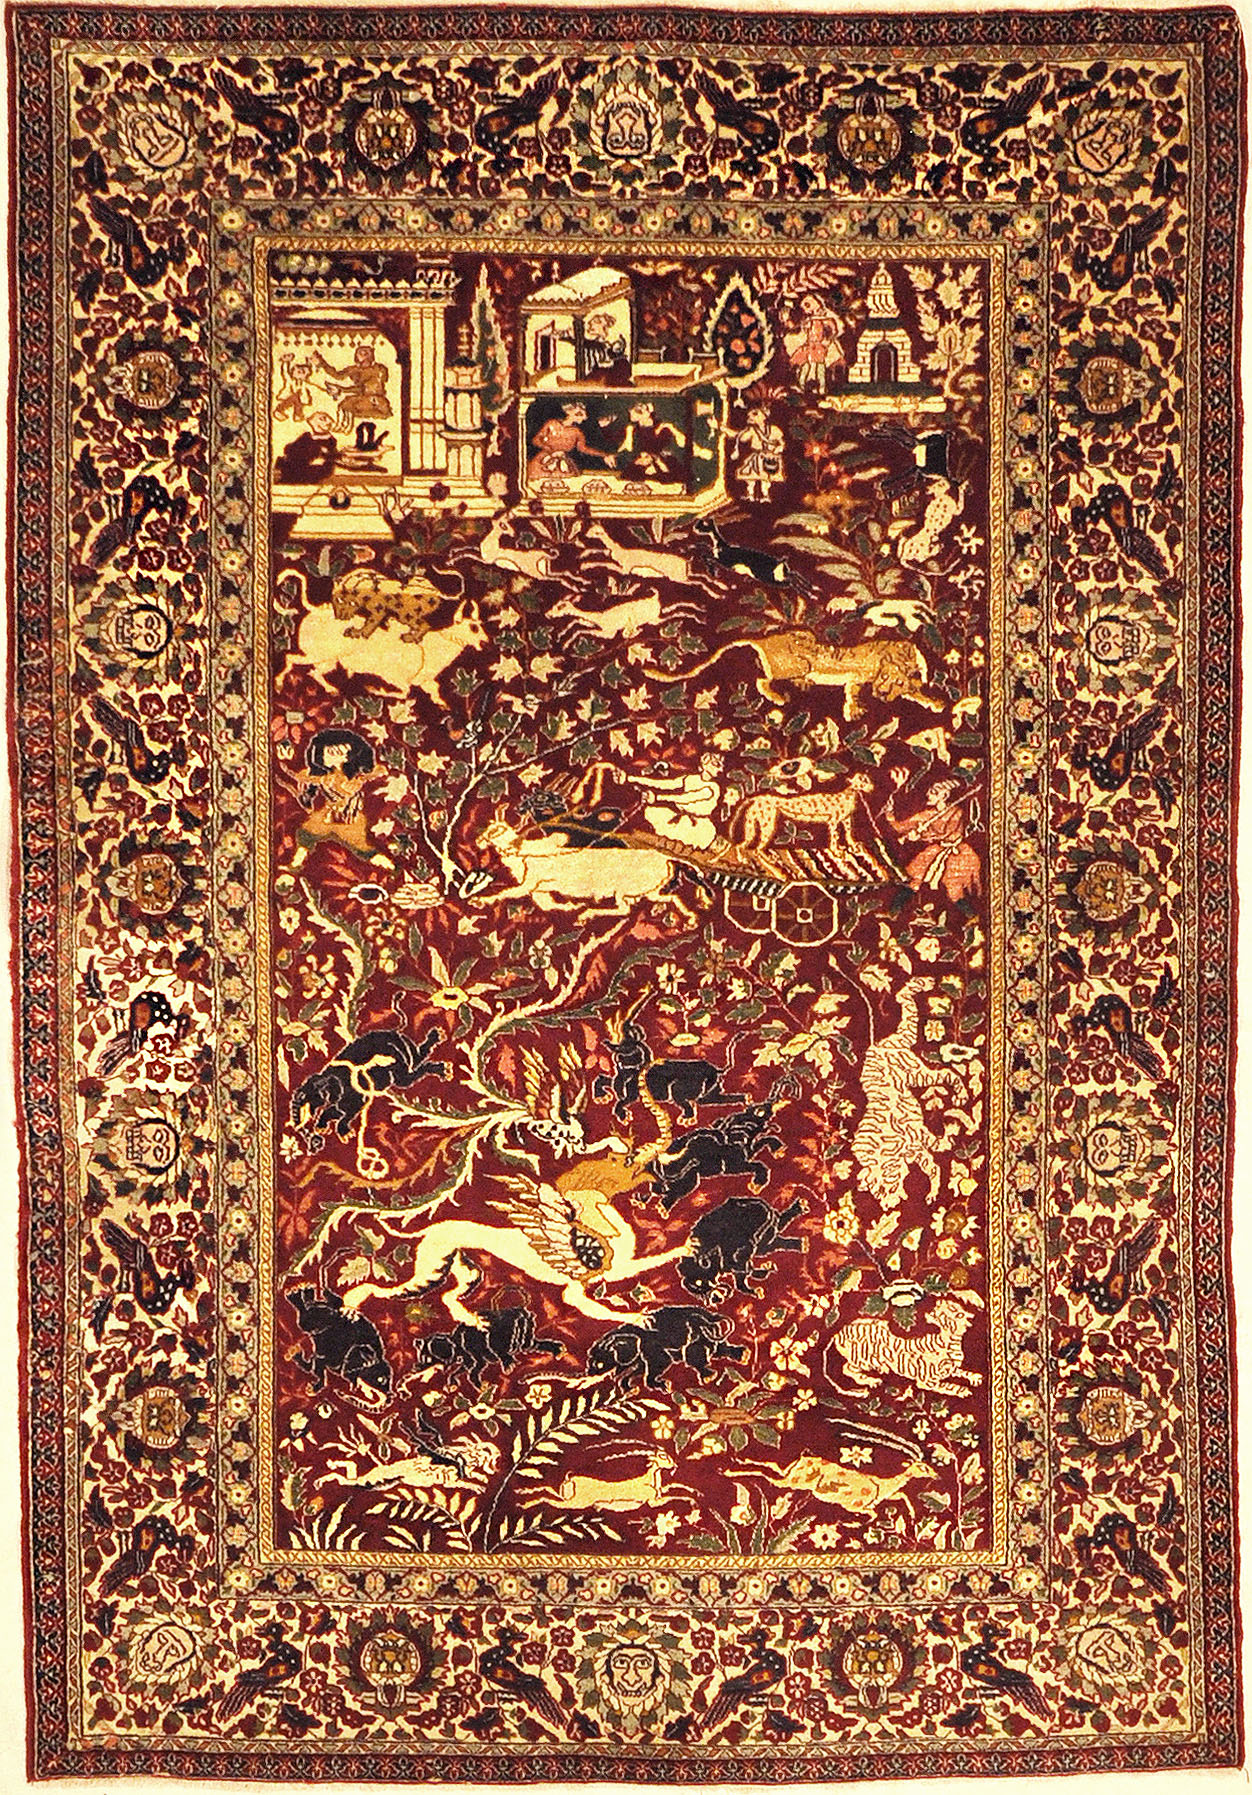 Antique Mughal Indian Emperial Rug. A piece of genuine authentic antique woven carpet art sold by Santa Barbara Design Center, Rugs and More.